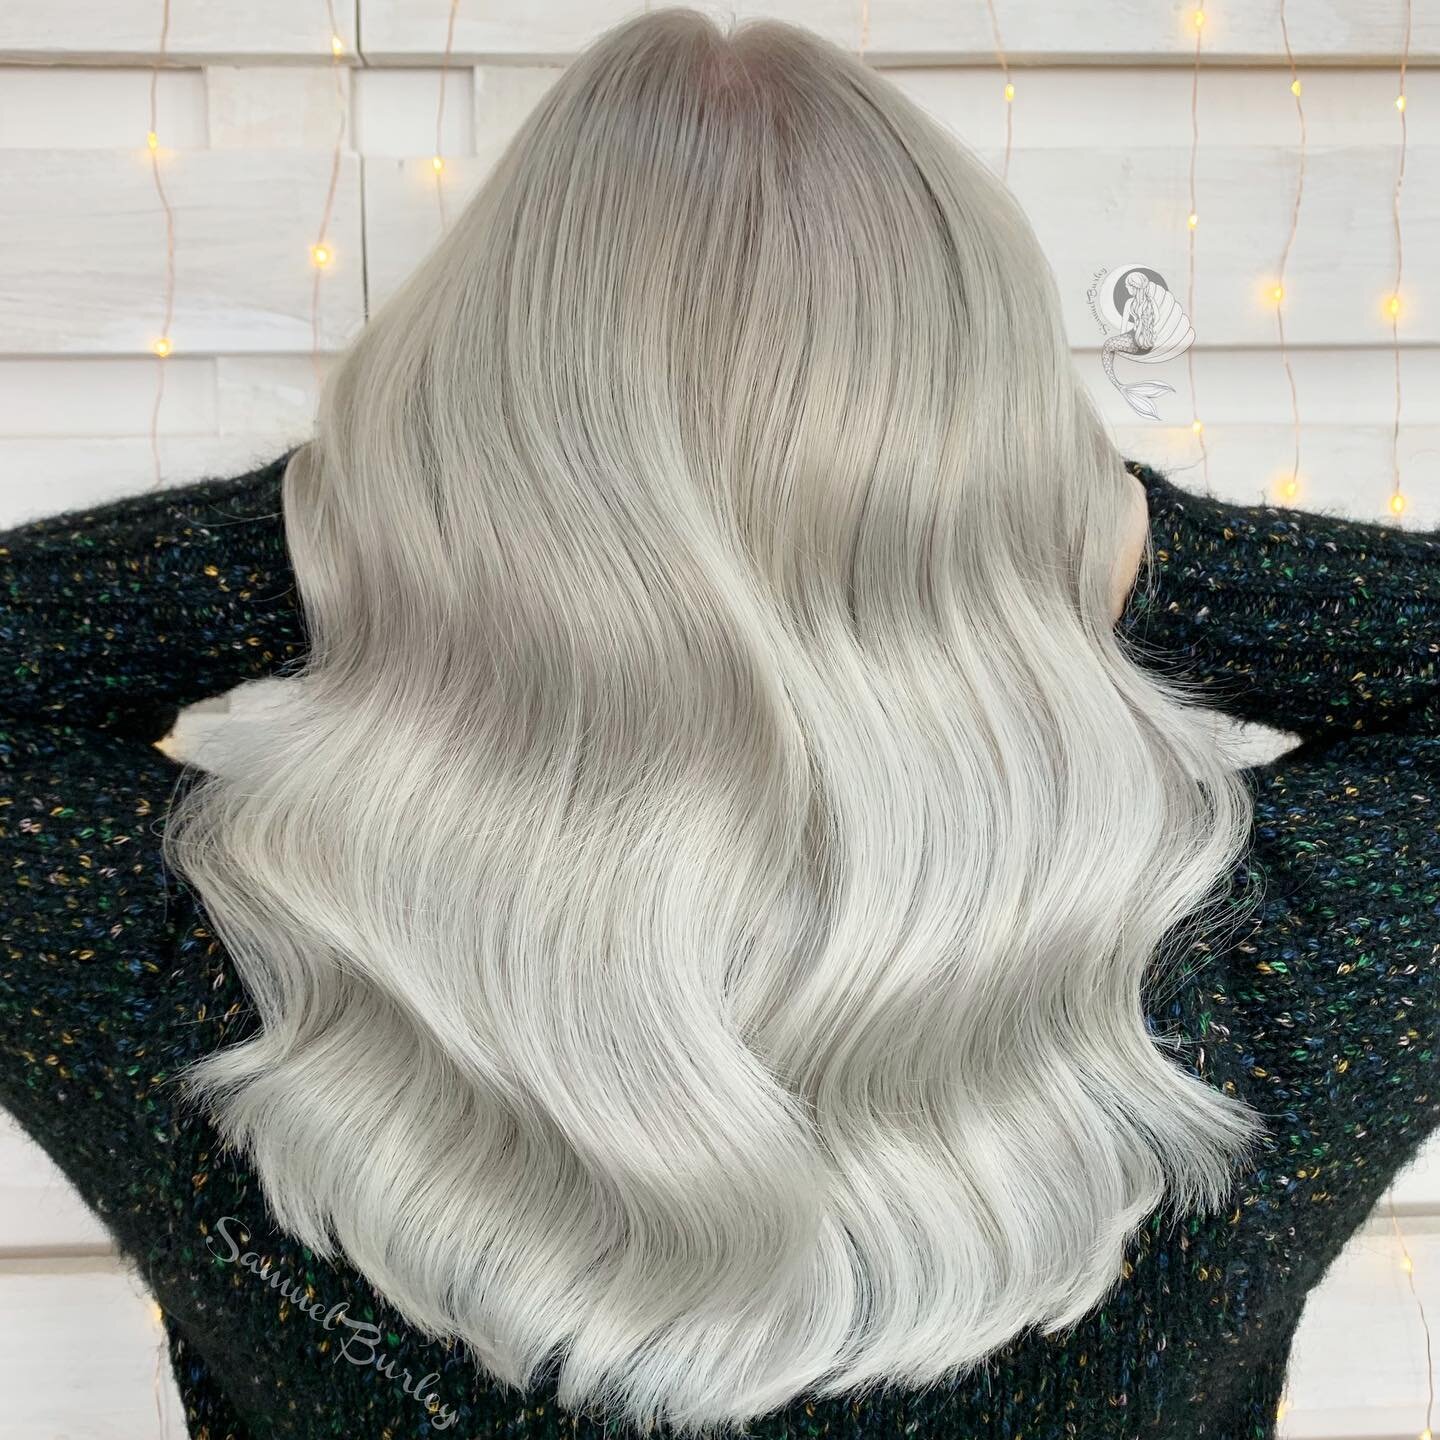 Lockdown hasn&rsquo;t been kind to those of us with scalp bleach 😜
Platinum colours require a great amount of maintenance and professional home care to keep the hair looking and feeling amazing. 
Colour appointments must be attended every 6-8 weeks 